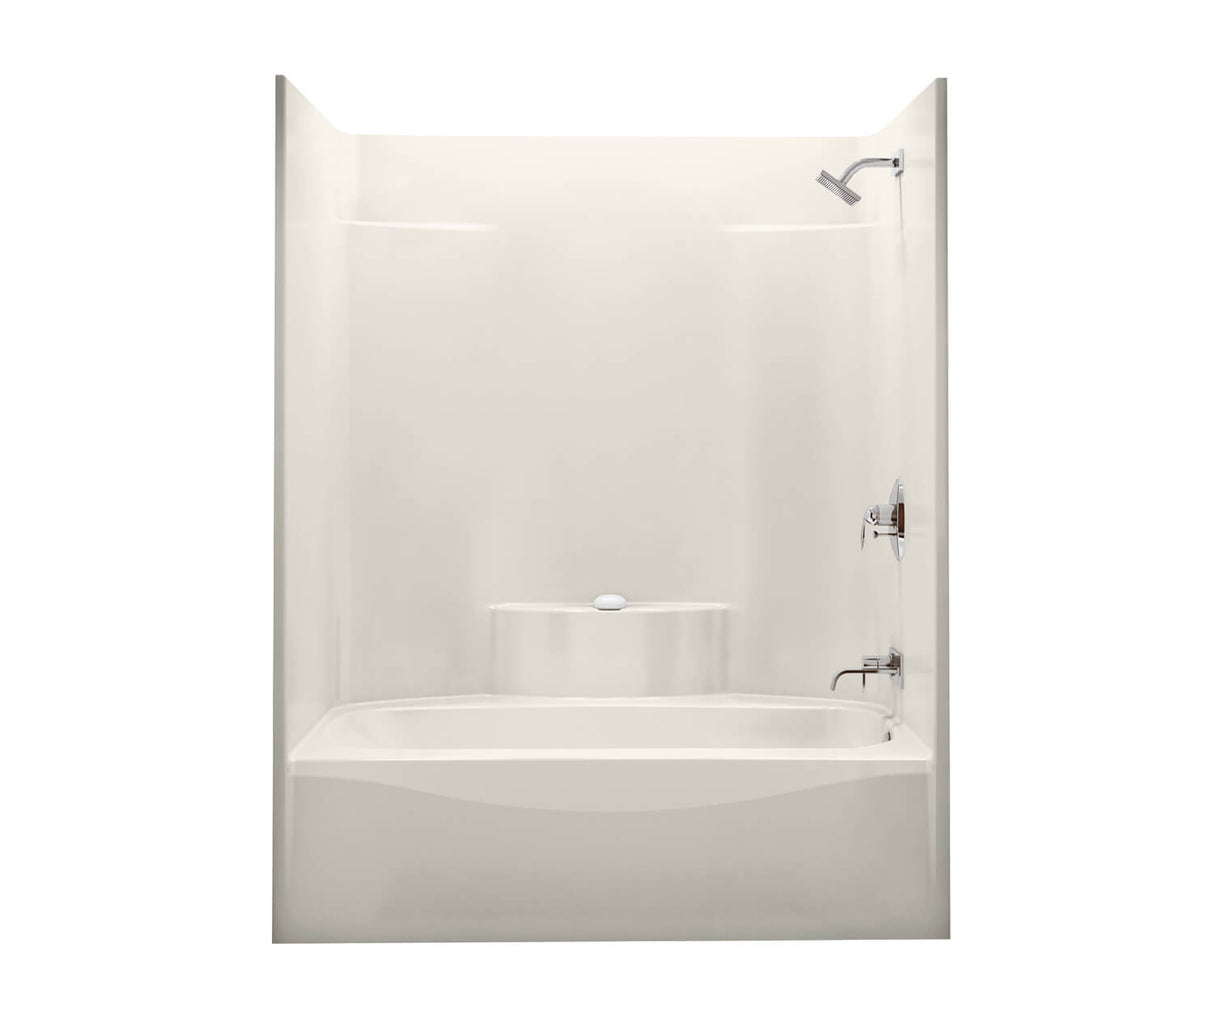 Aker TS-3660 AFR AcrylX Alcove Left-Hand Drain One-Piece Tub Shower in Biscuit